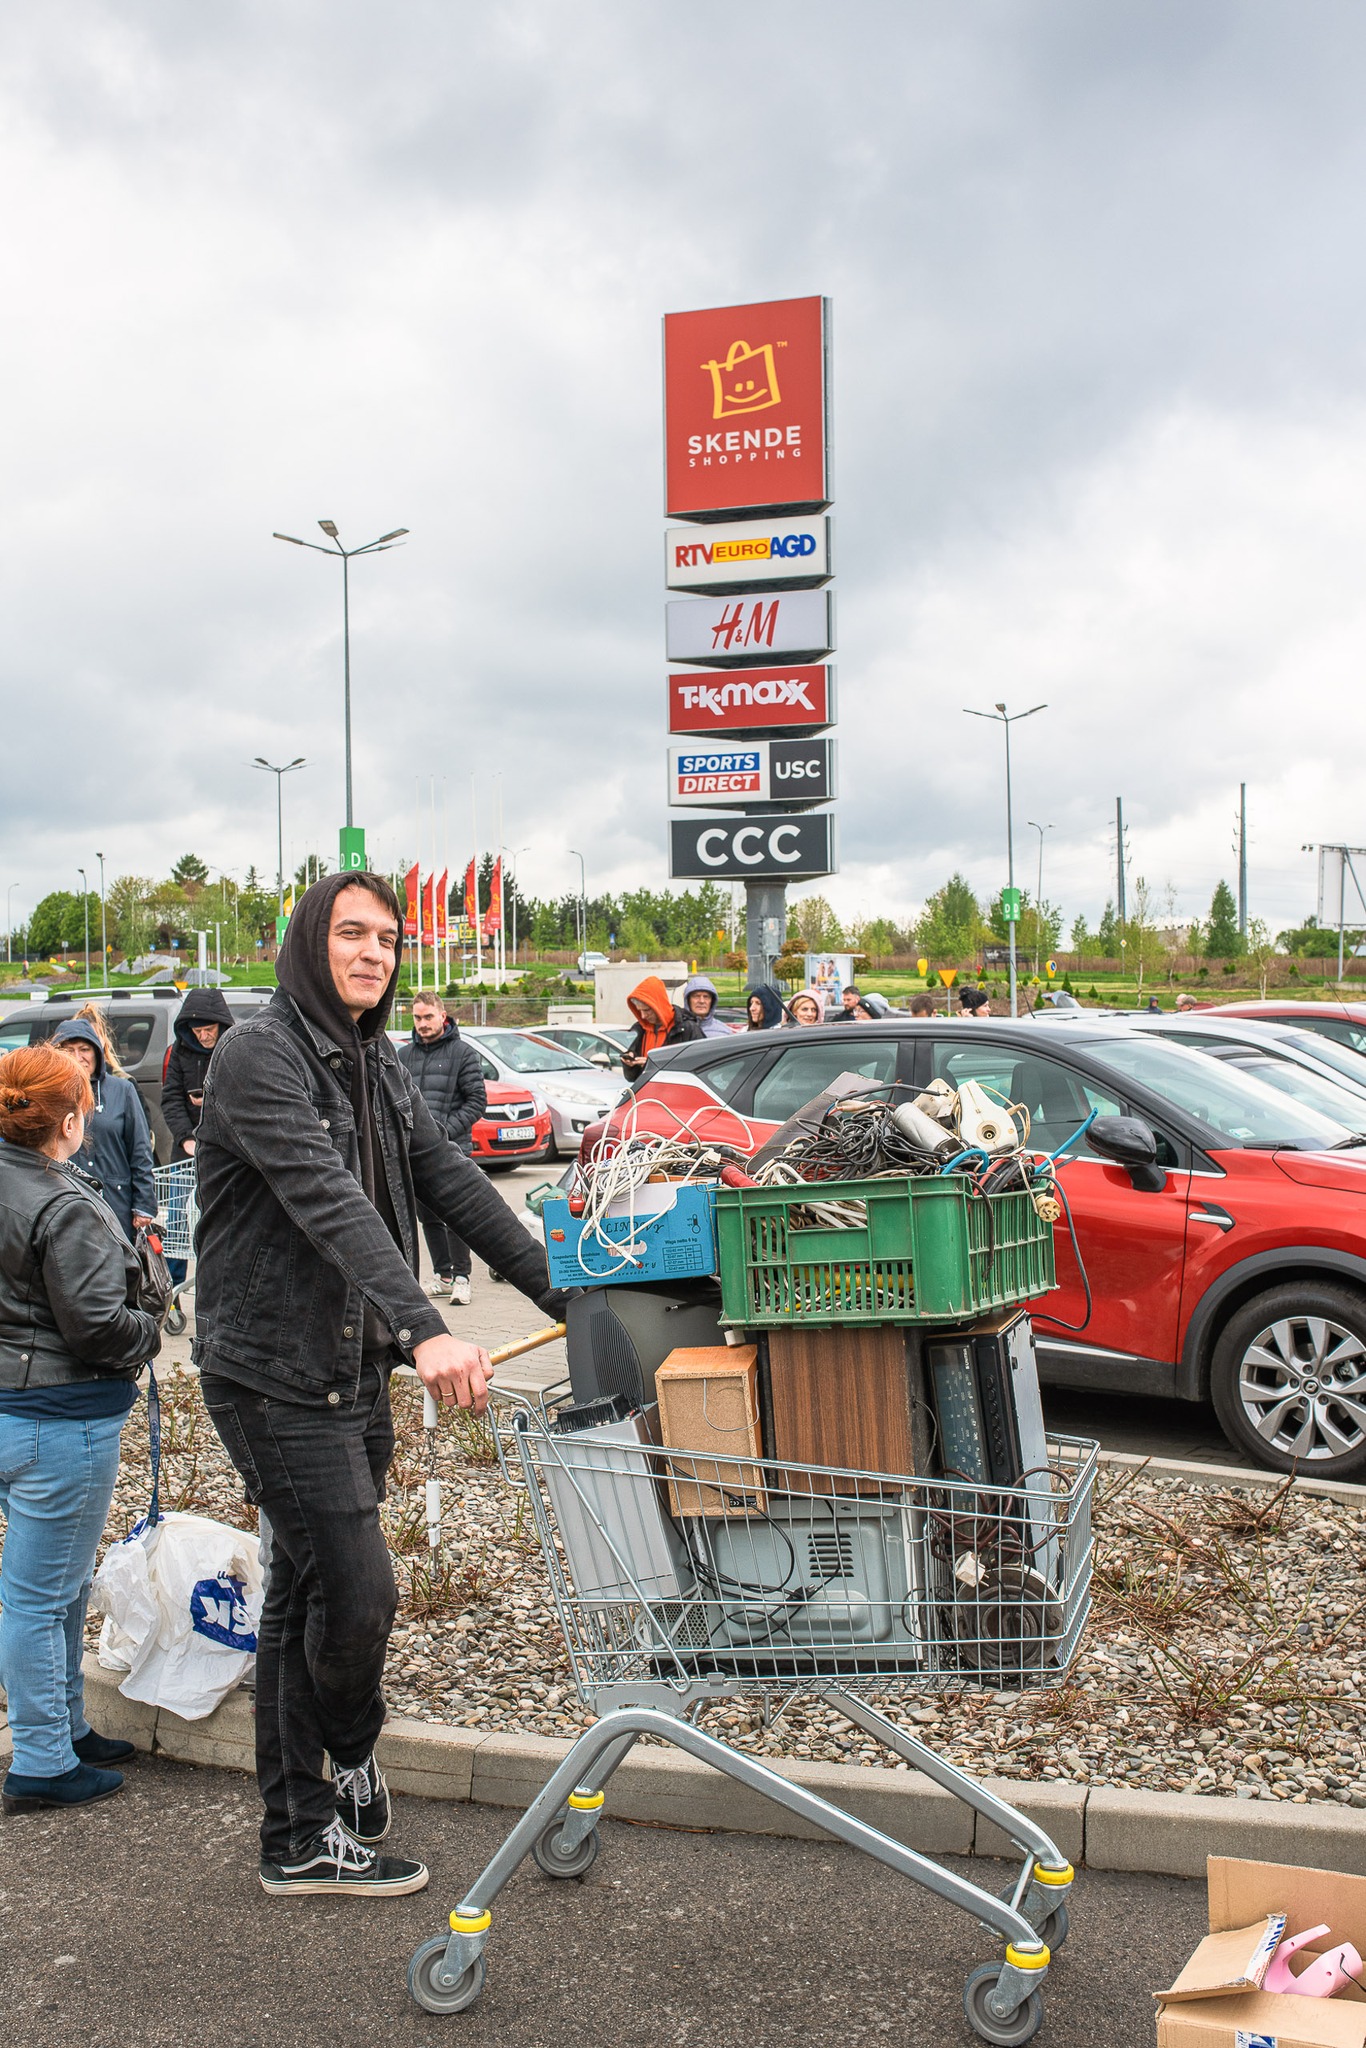 Earth Day Celebration in Lublin: Turning E-Waste into Green Initiatives